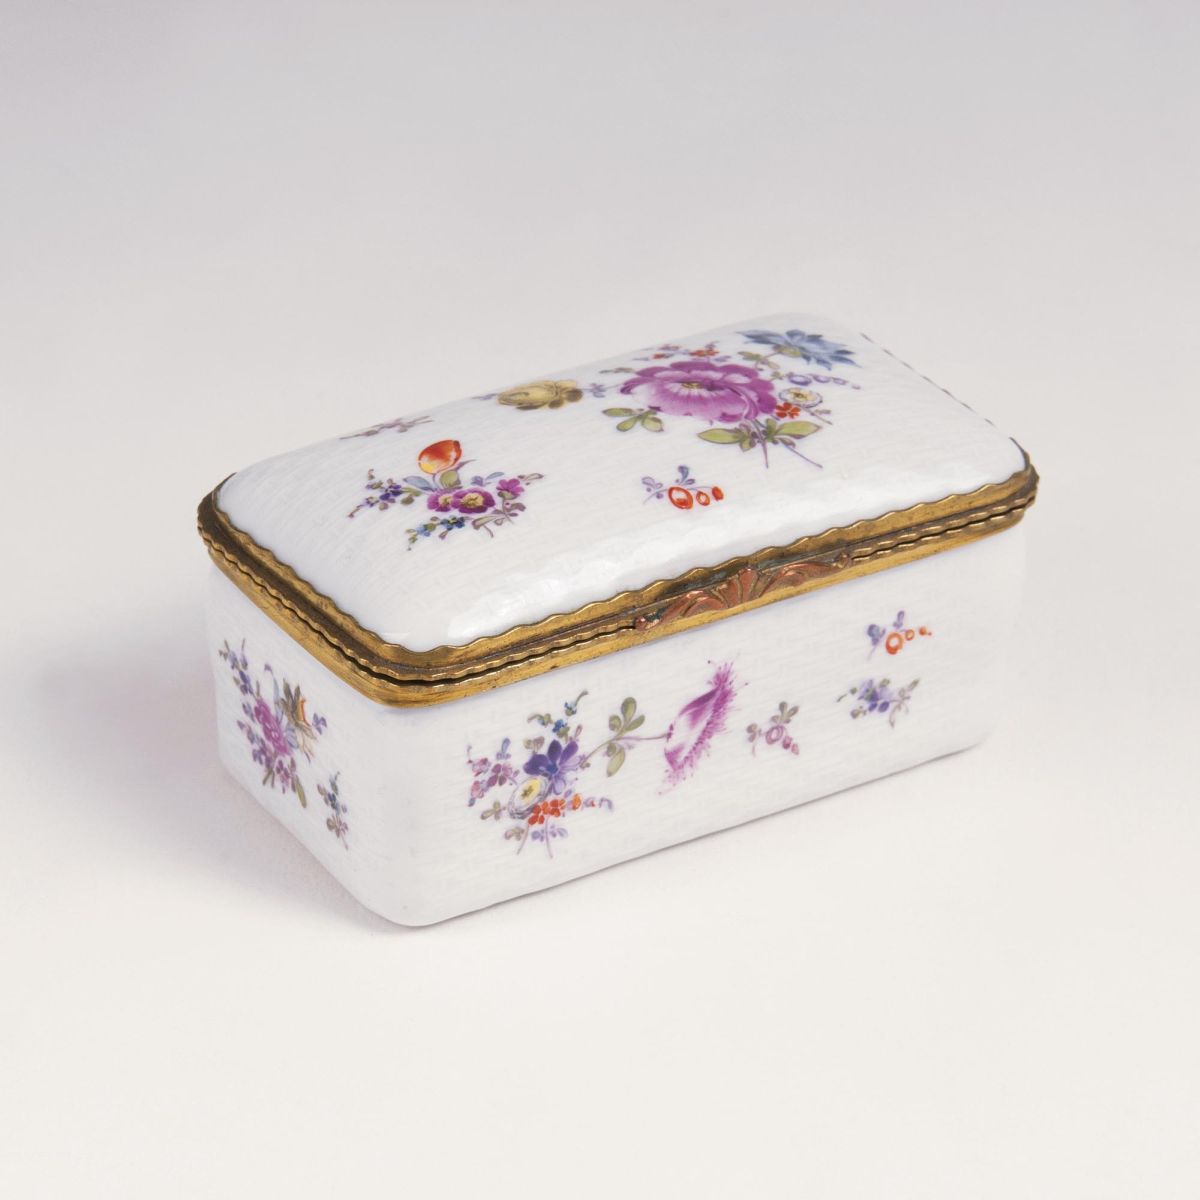 A Snuff Box with Ozier Relief and Flower Painting